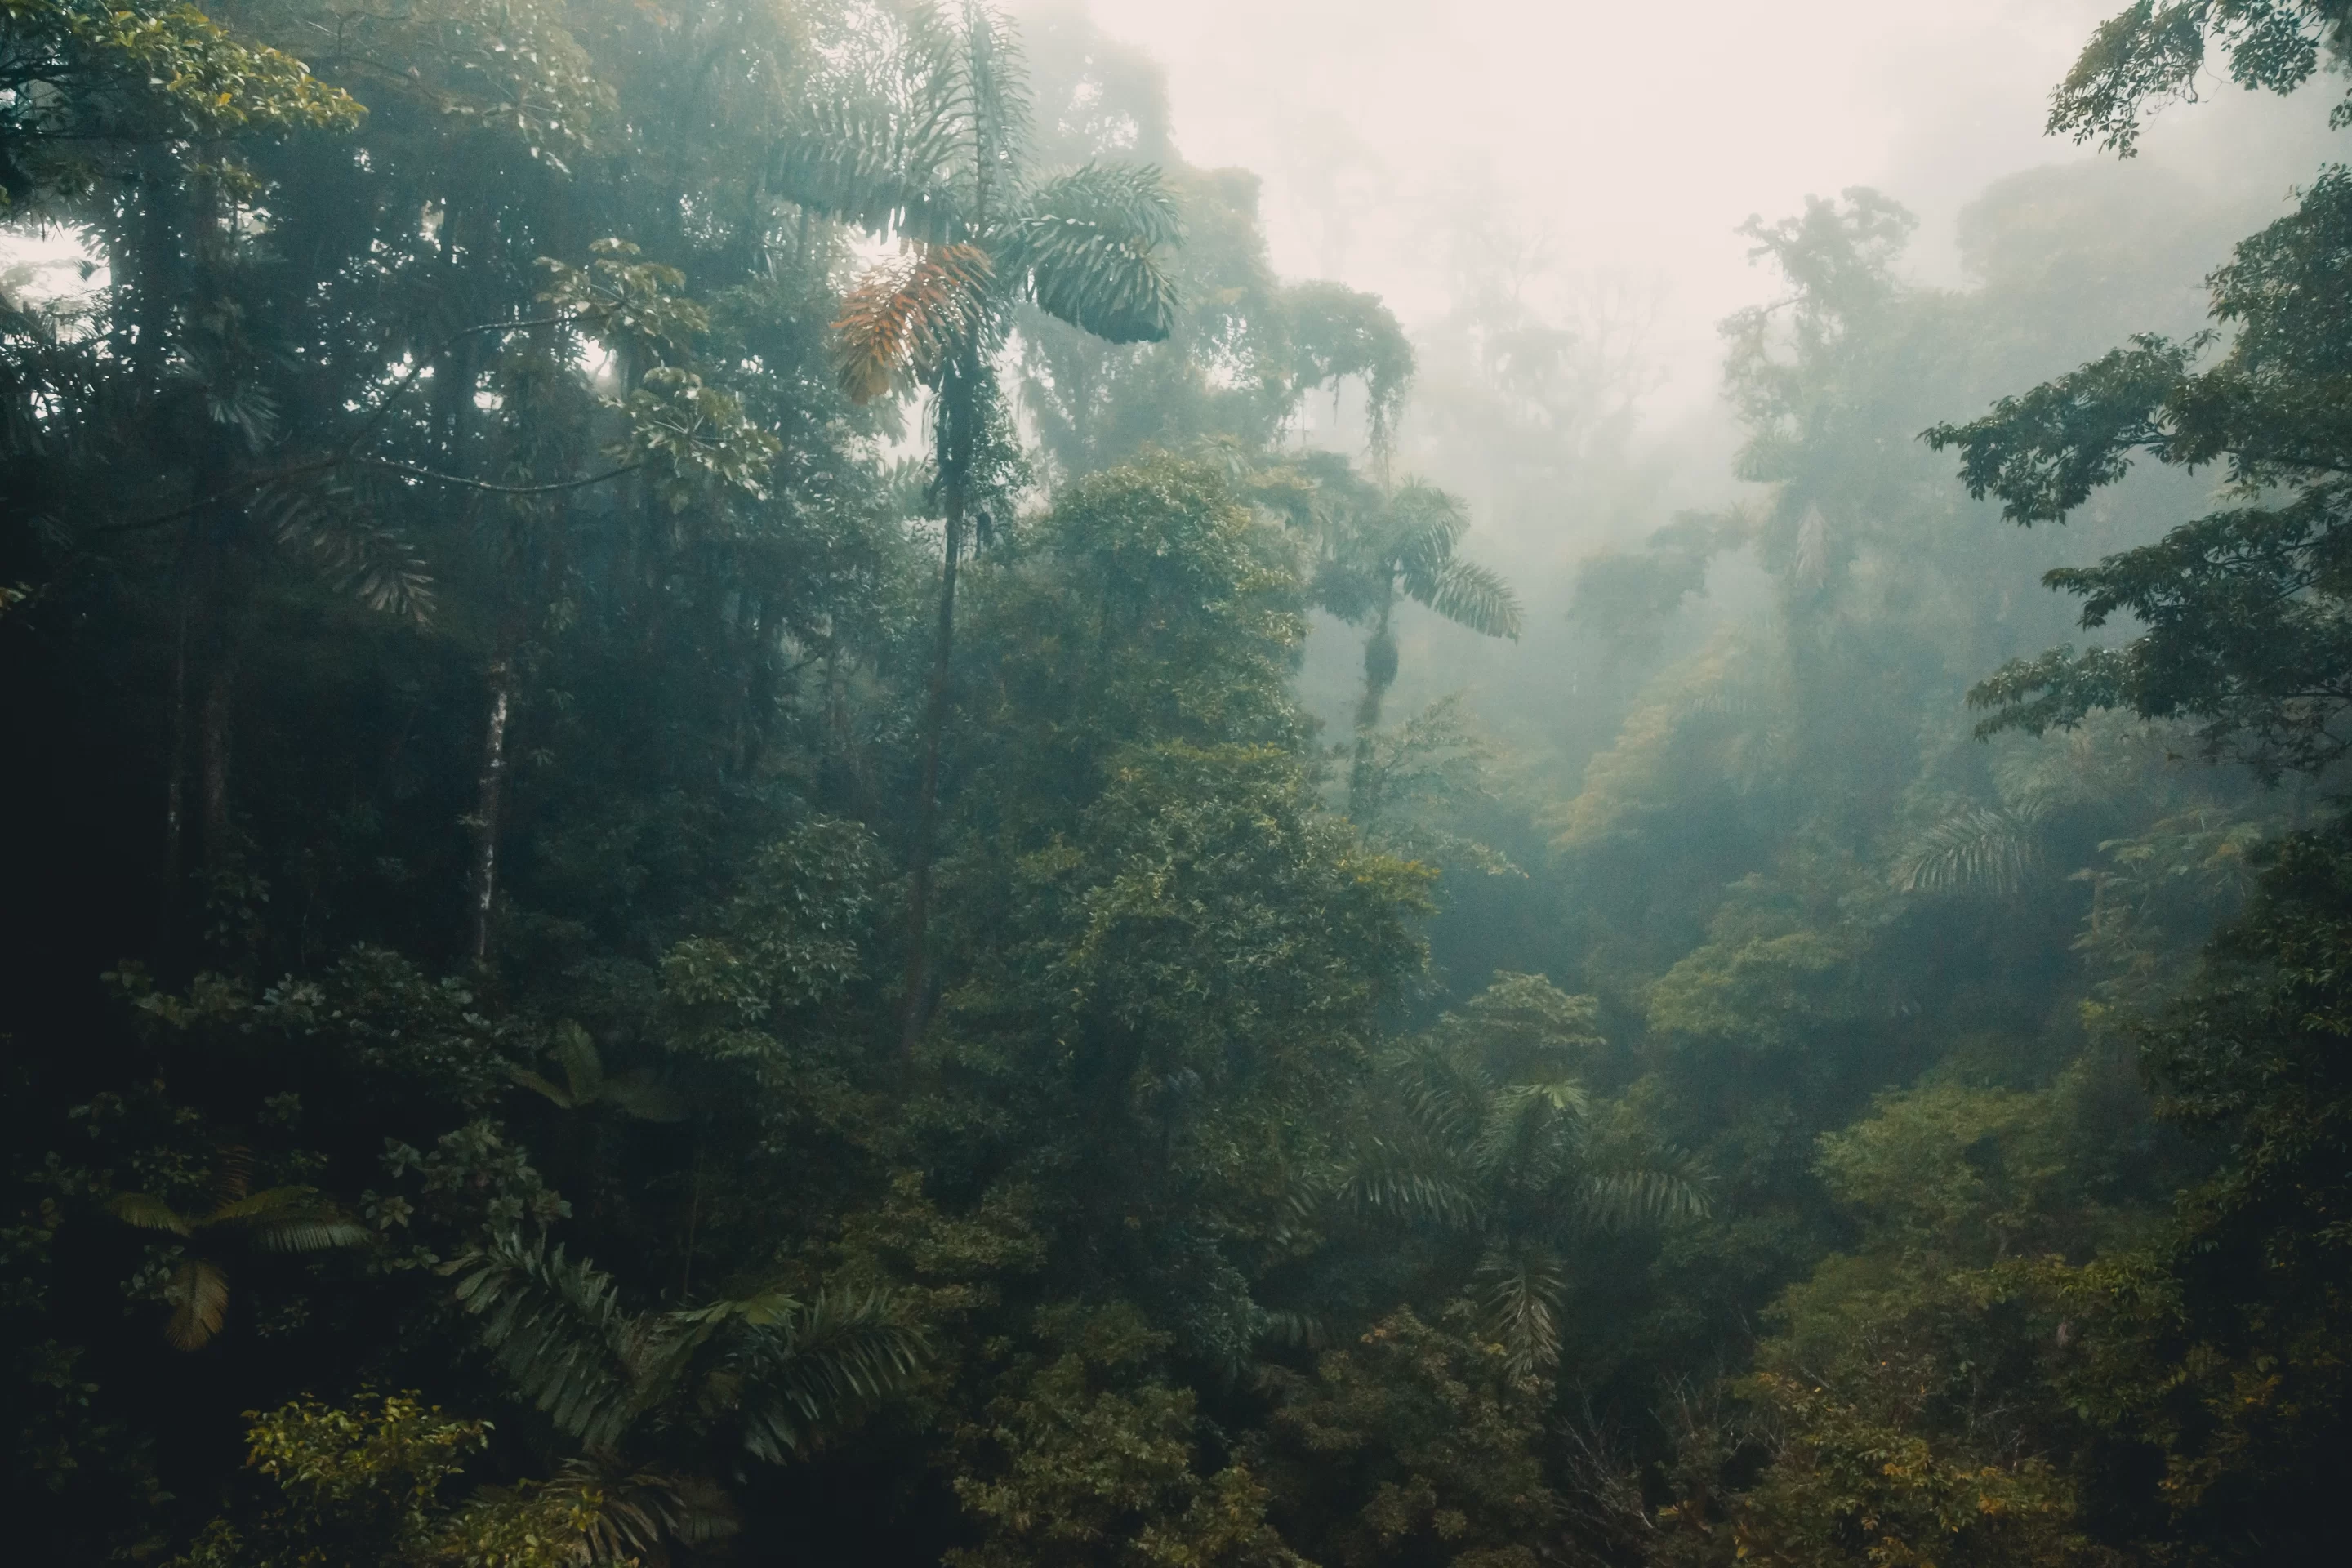 Visit Monteverde and explore the stunning cloud forest reserves.